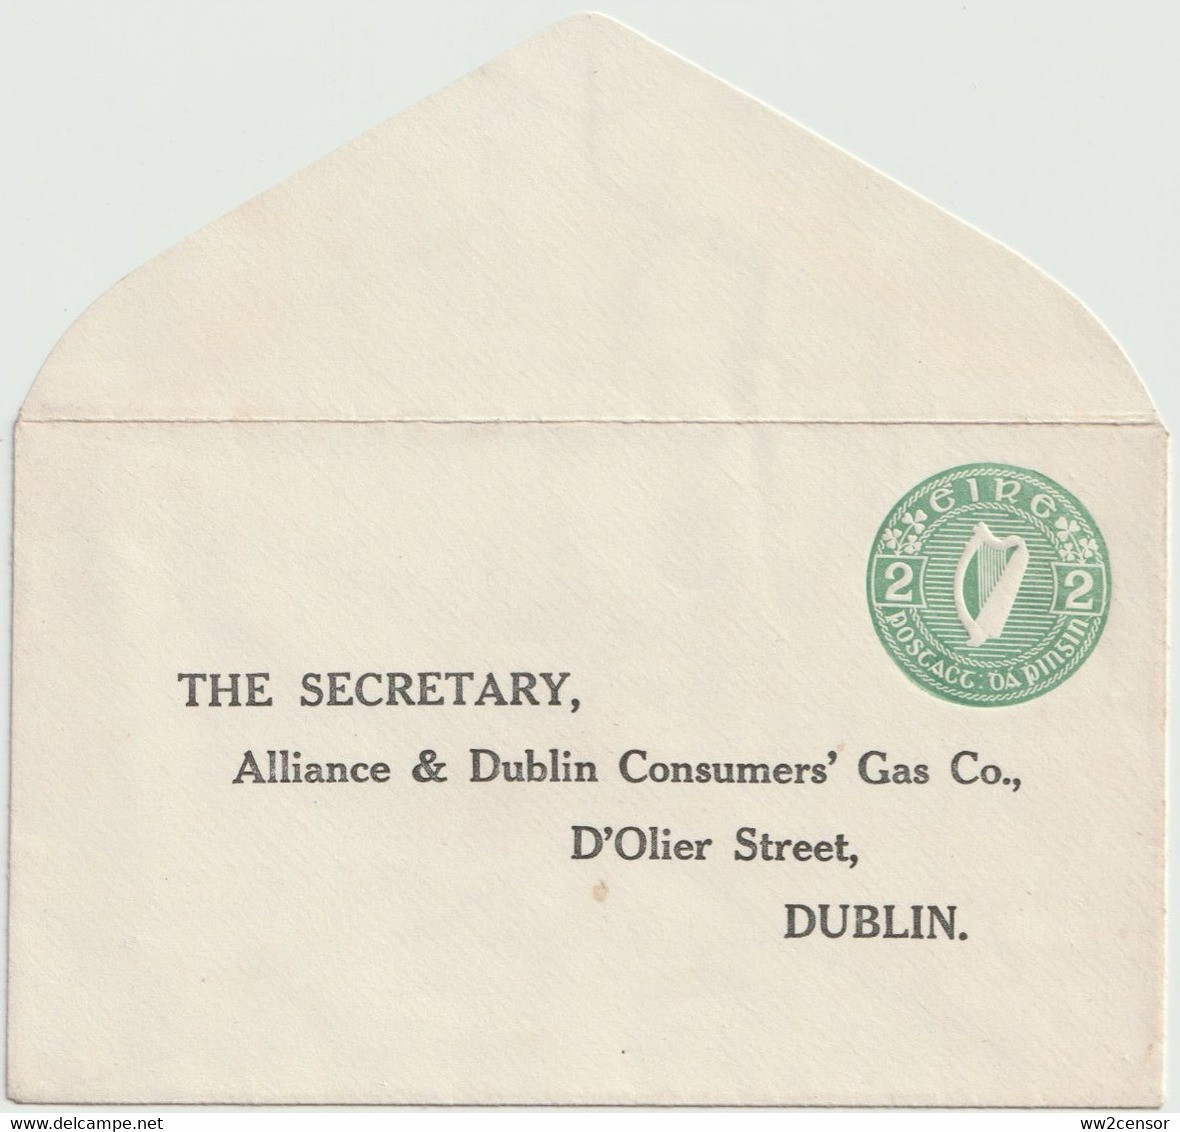 Ireland Irland Alliance & Dublin Consumers' Gas Co. Stamped To Order Postal Stationery 2d Envelope High Catalogue Value - Entiers Postaux